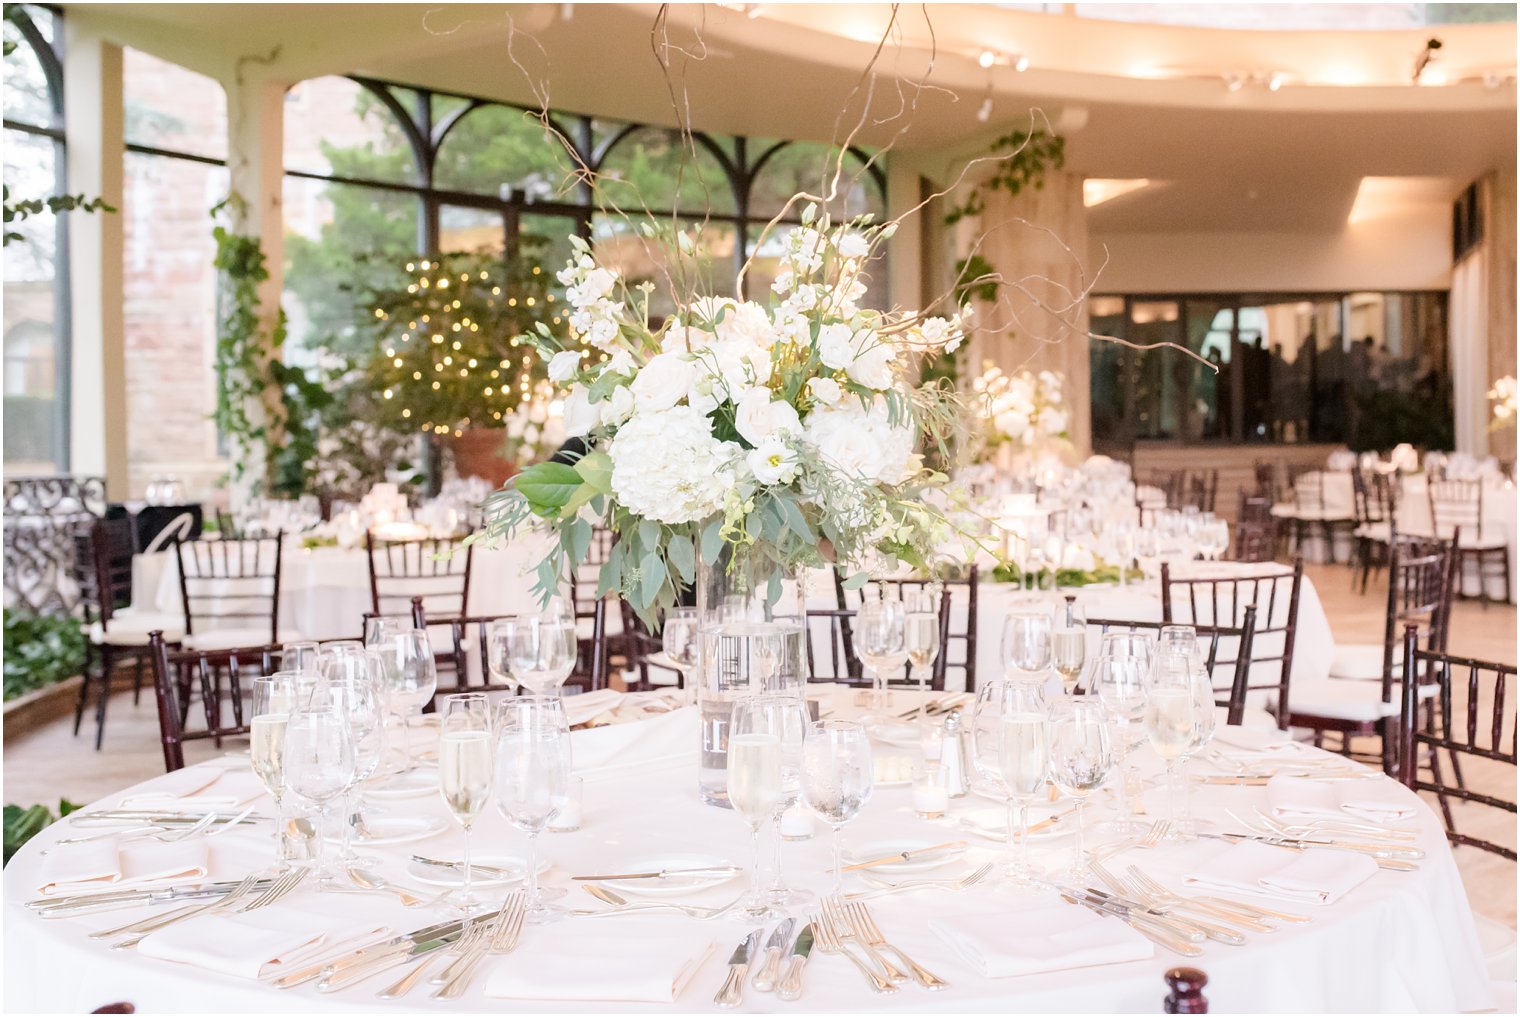 elegant white and green floral centerpieces by Meghan Pinsky photographed by Idalia Photography